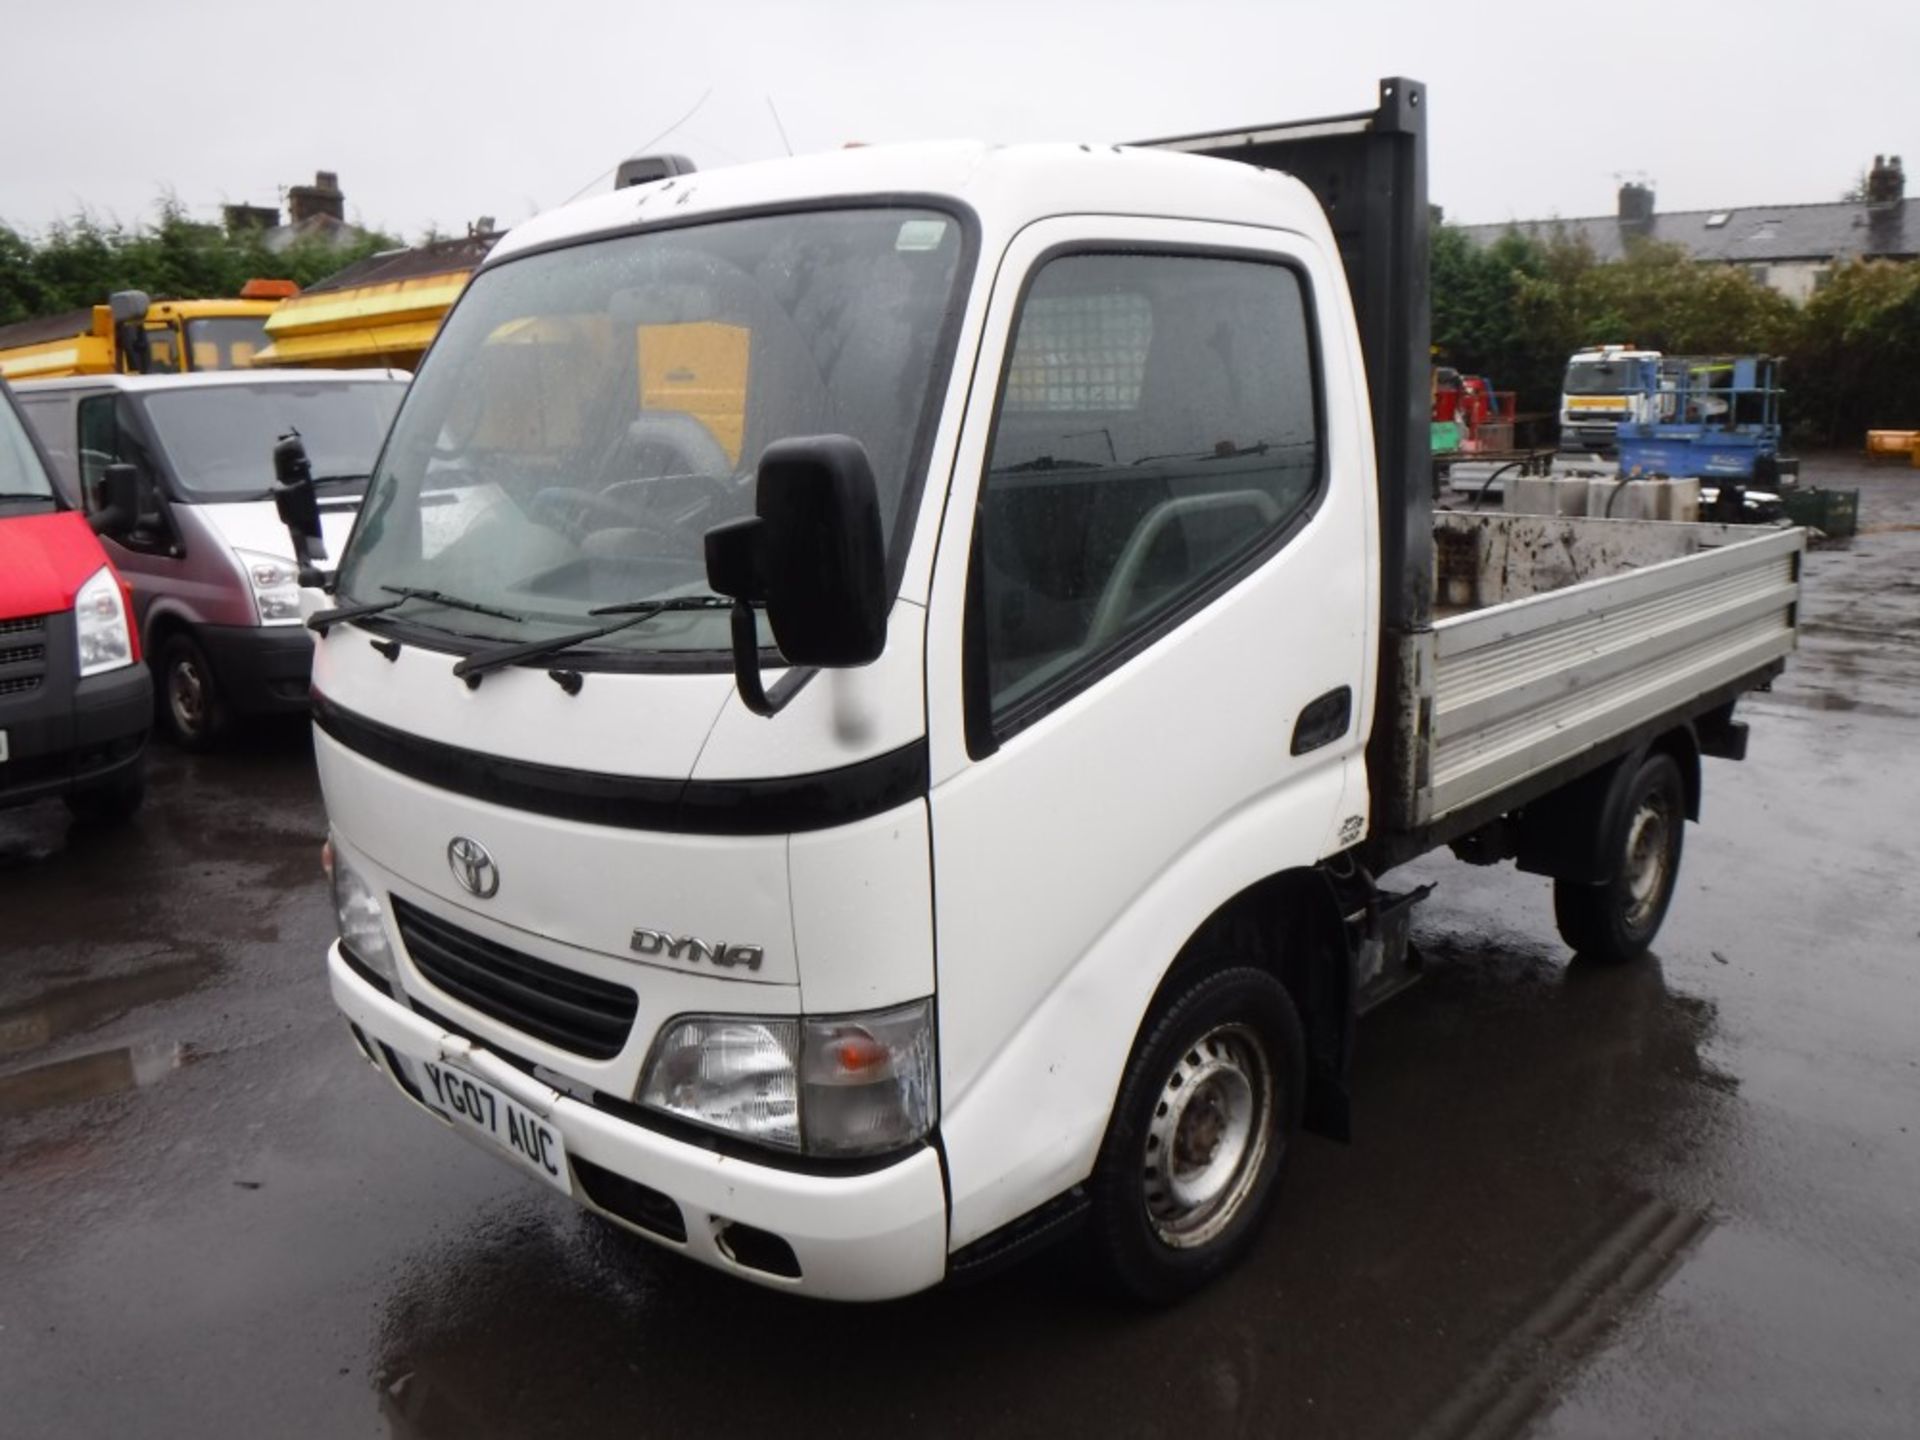 07 reg TOYOTA DYNA 300 D-4D DROPSIDE LORRY, 1ST REG 08/07, 100929M WARRANTED, V5 HERE, 1 OWNER - Image 2 of 5